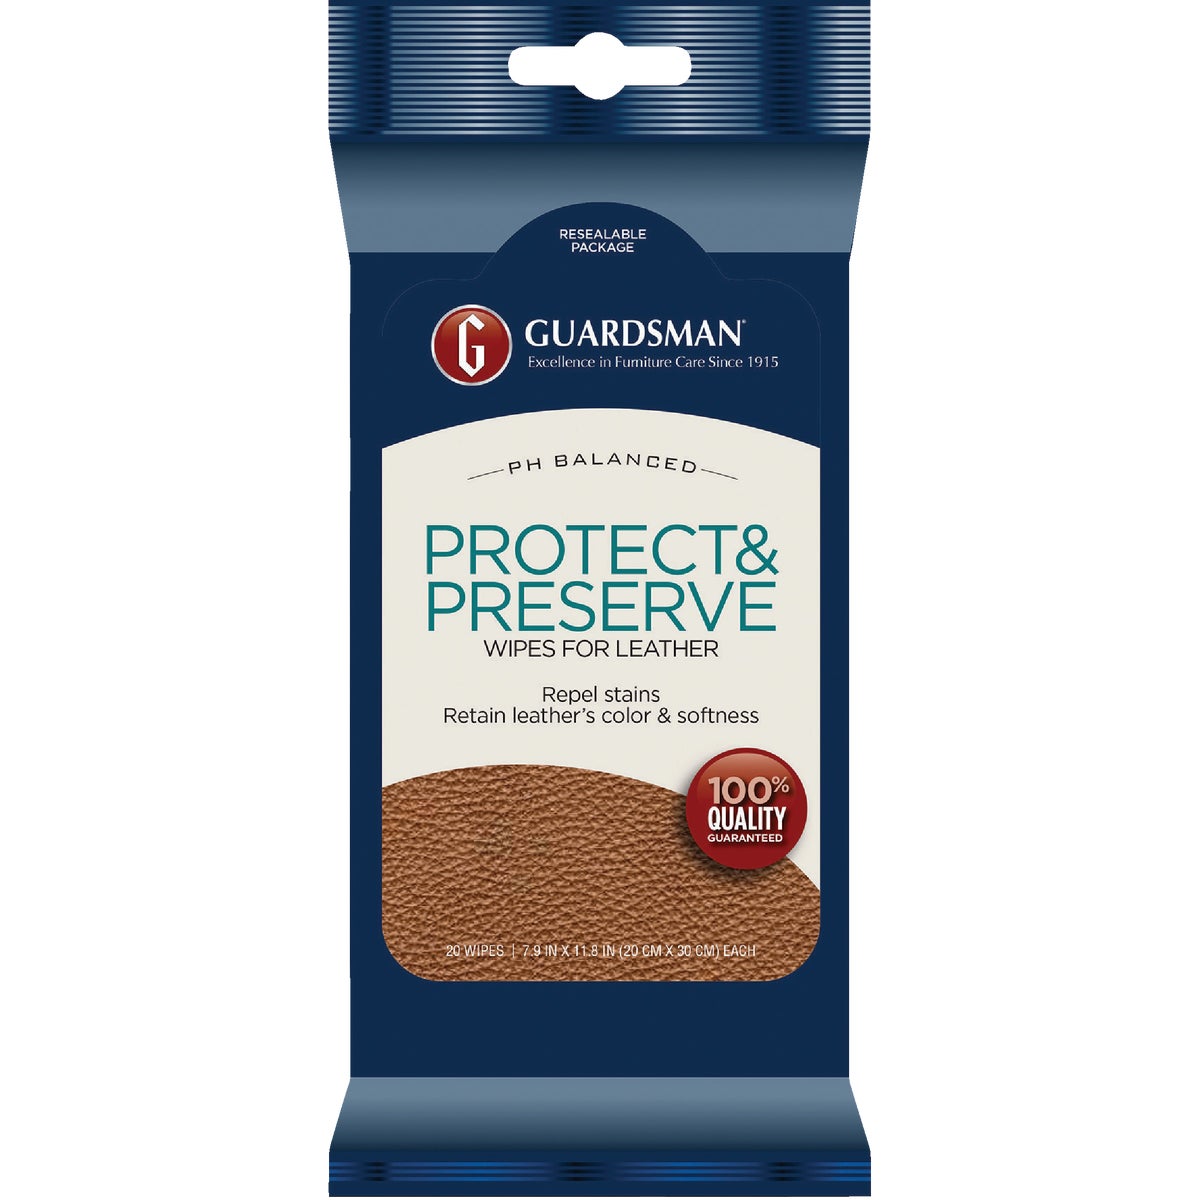 Guardsman Protect & Preserve Leather Care Wipes (20-Pack)